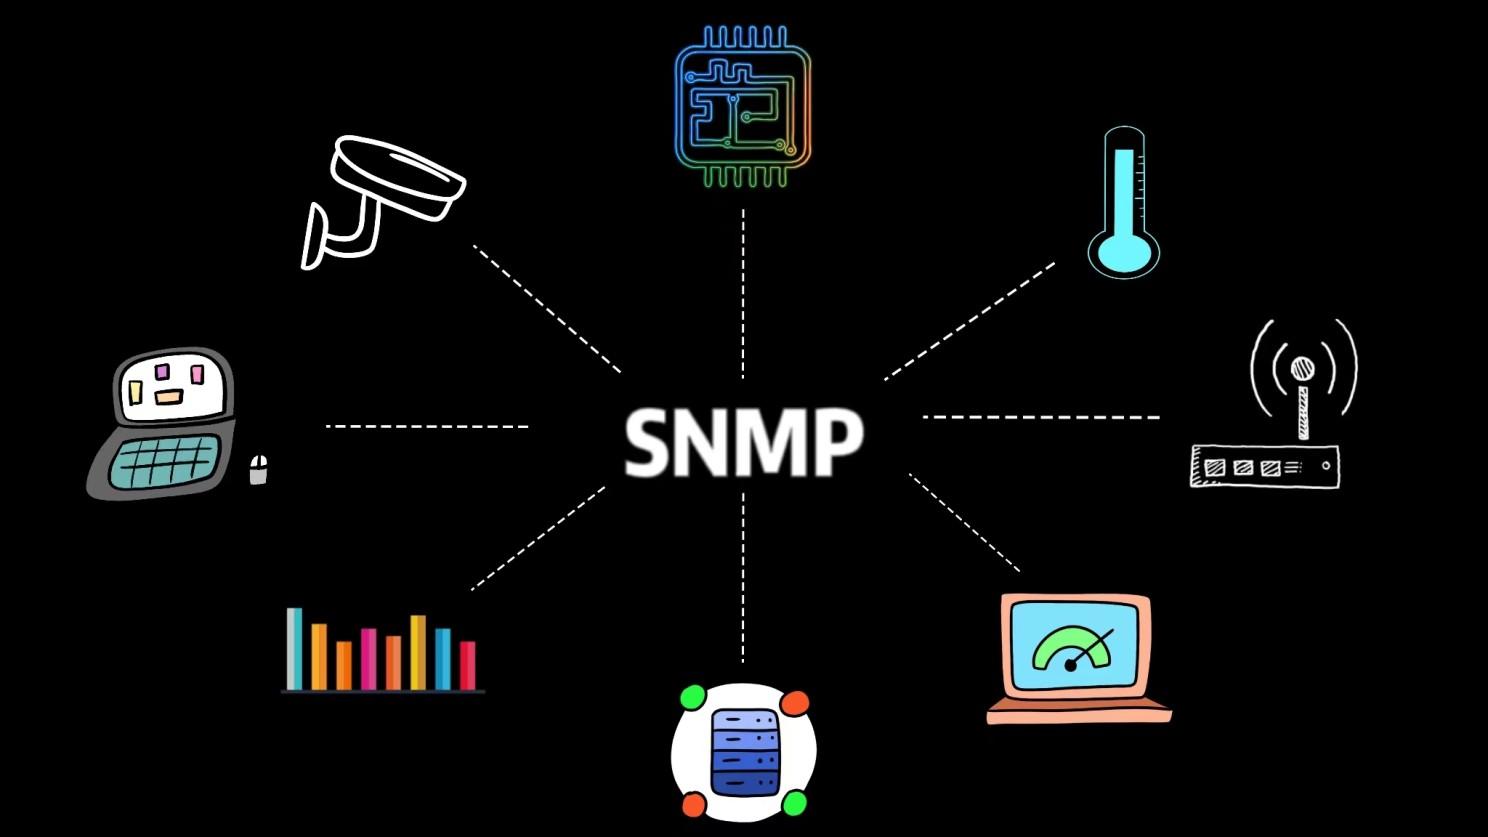 SNMP application in wifi